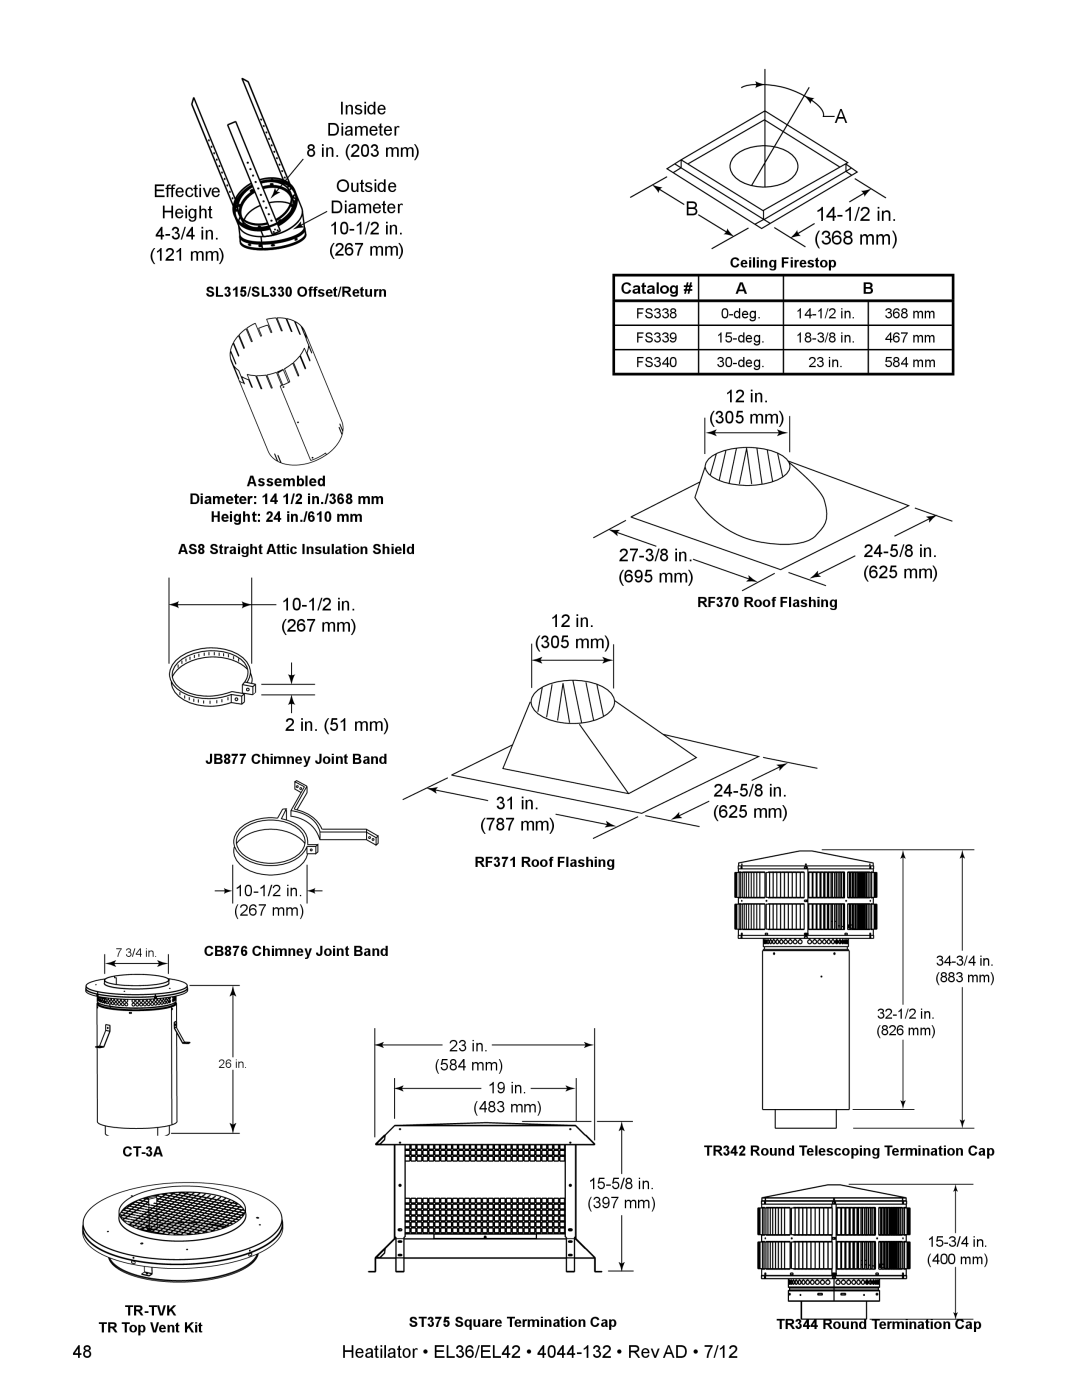 Hearth and Home Technologies EL36, EL42 owner manual JB877 Chimney Joint Band, Ceiling Firestop, CB876 Chimney Joint Band 